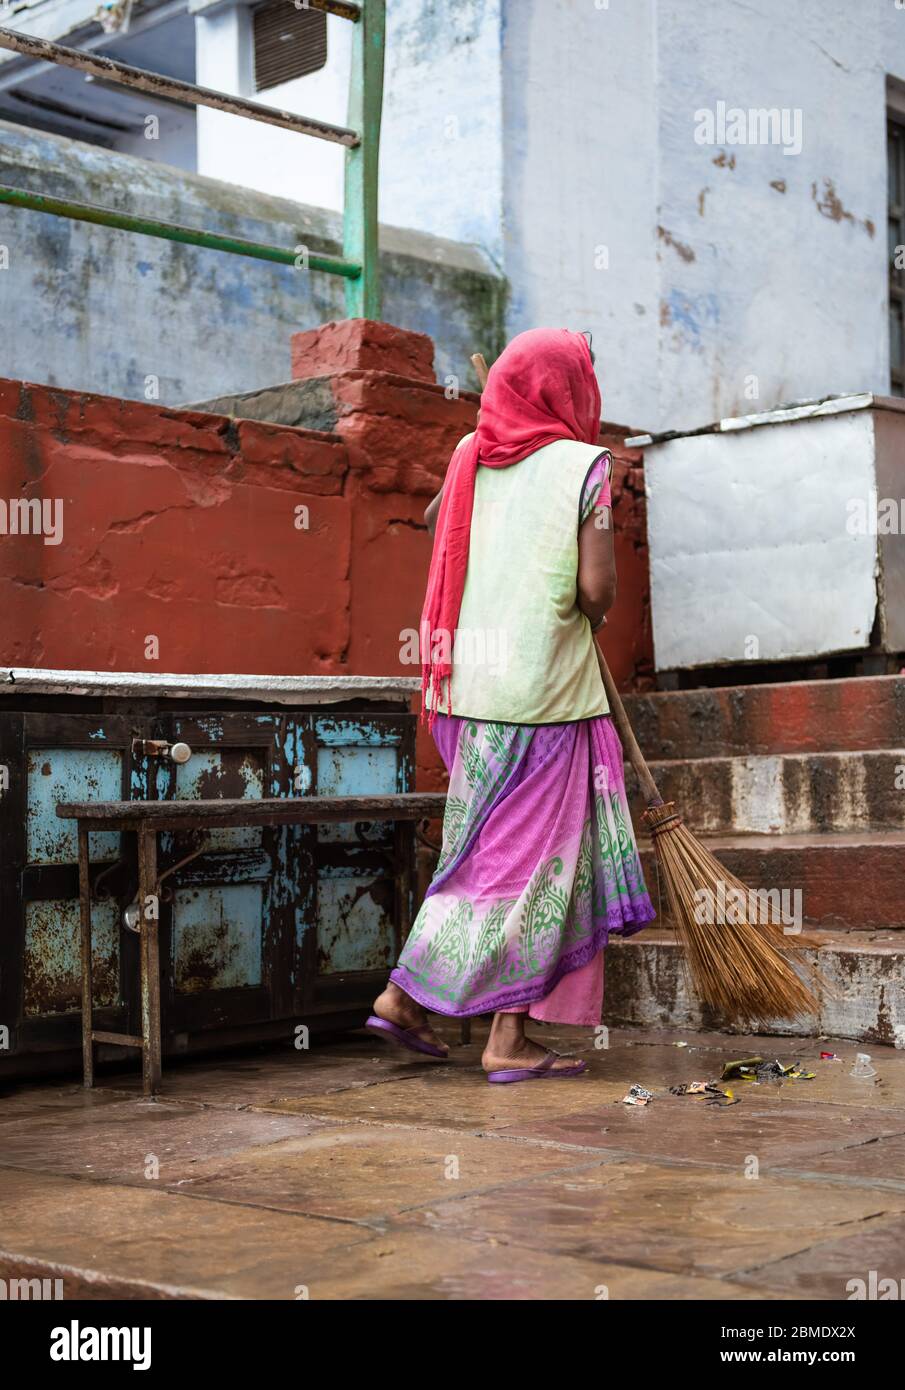 One woman sweeping a dirty walkway in Varanasi, India, wearing a head covering and colorful clothing, near the Ganges River. Stock Photo